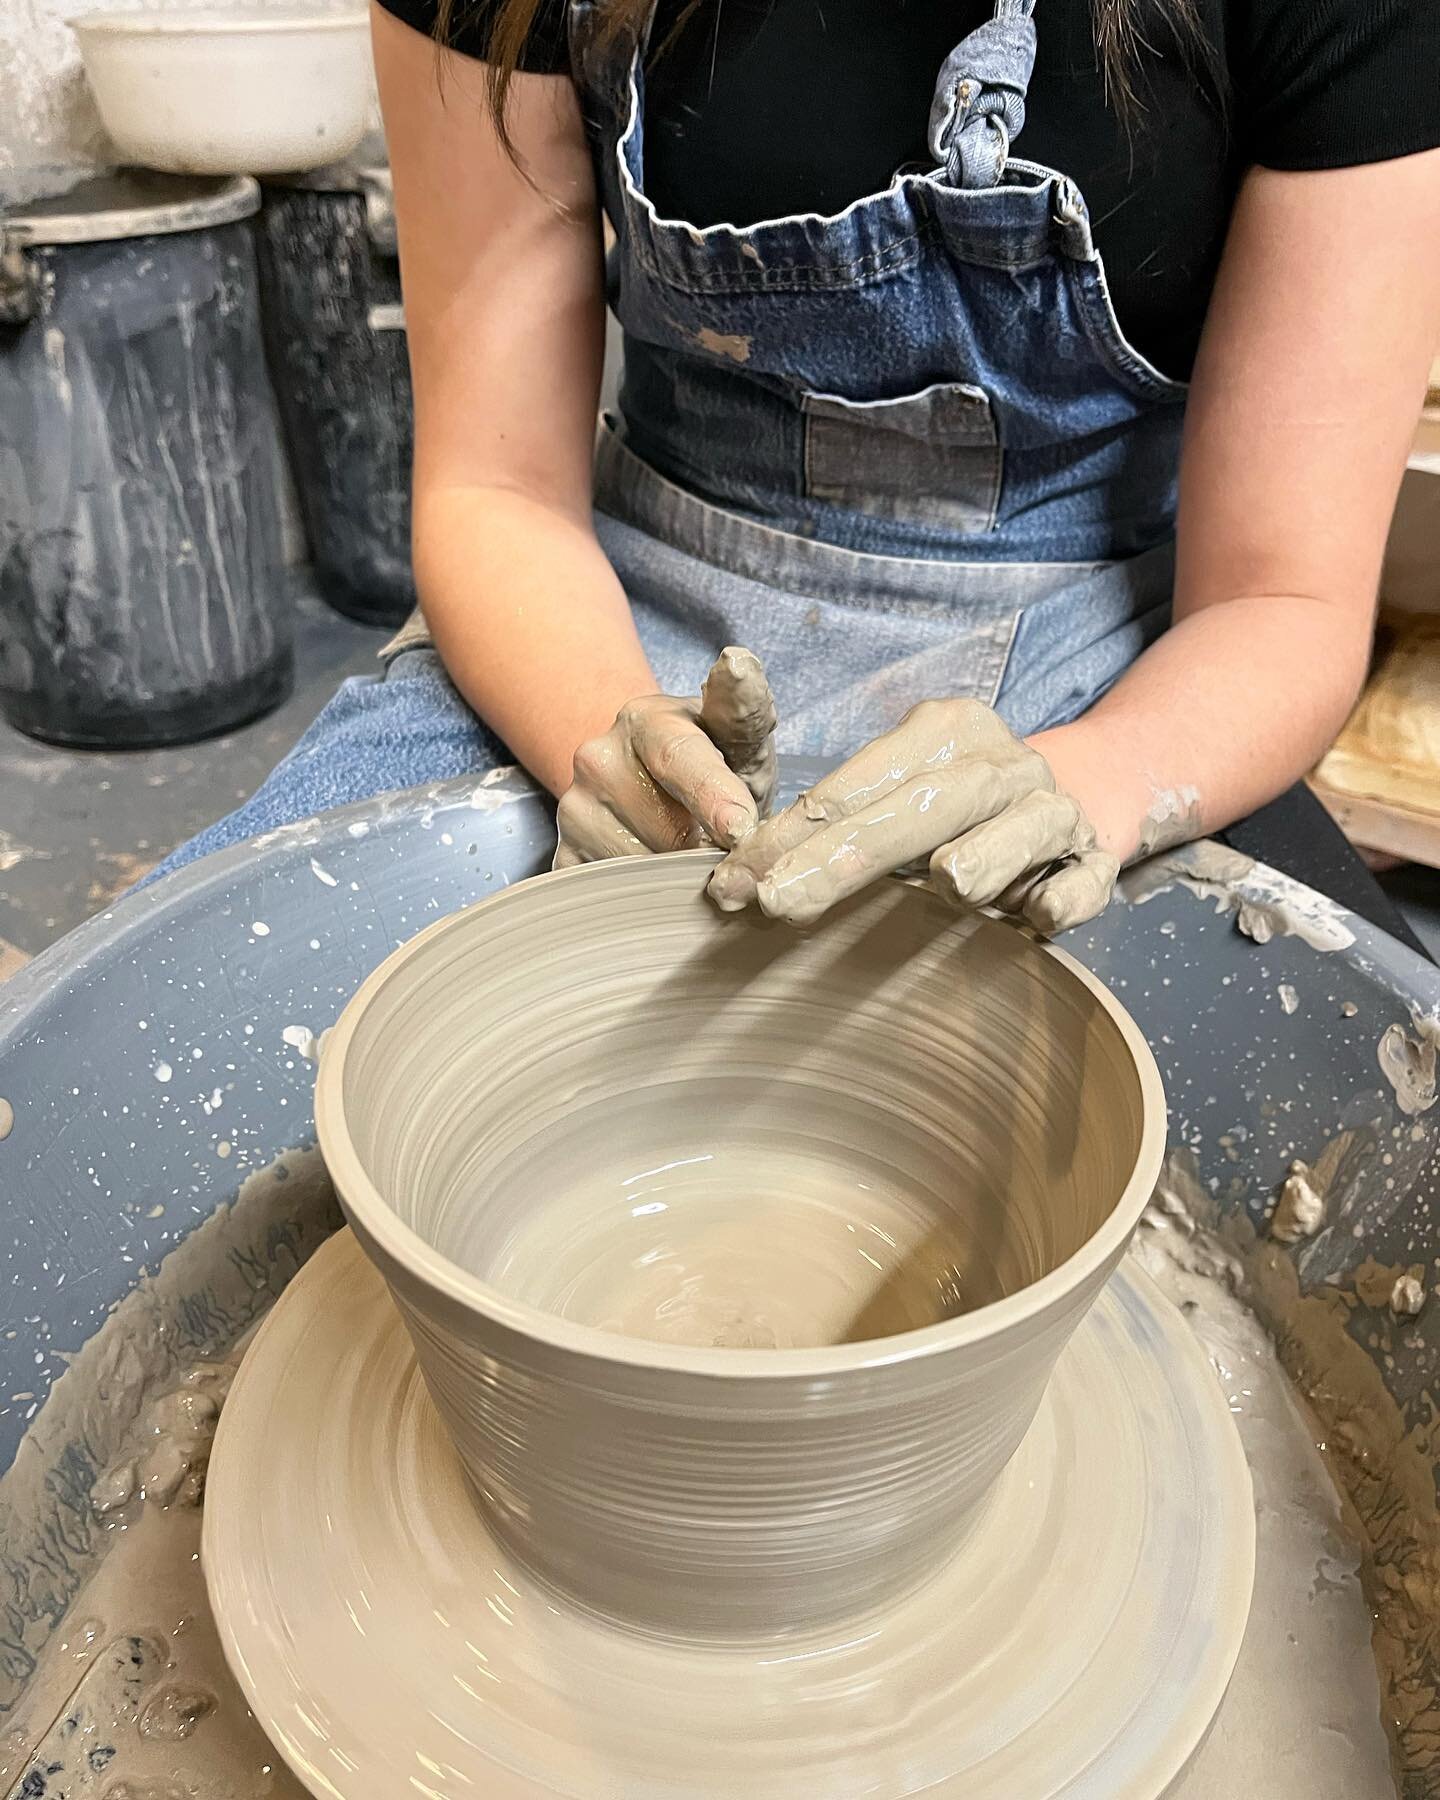 Just a random selection of images from the studio &hellip; making things is what we doooo!

#pottery #potterystudio #potterynorthlondon #northlondon #islington next door to #camden #hackney #haringey #barnet #giftideas #christmasgifts #giftexperience